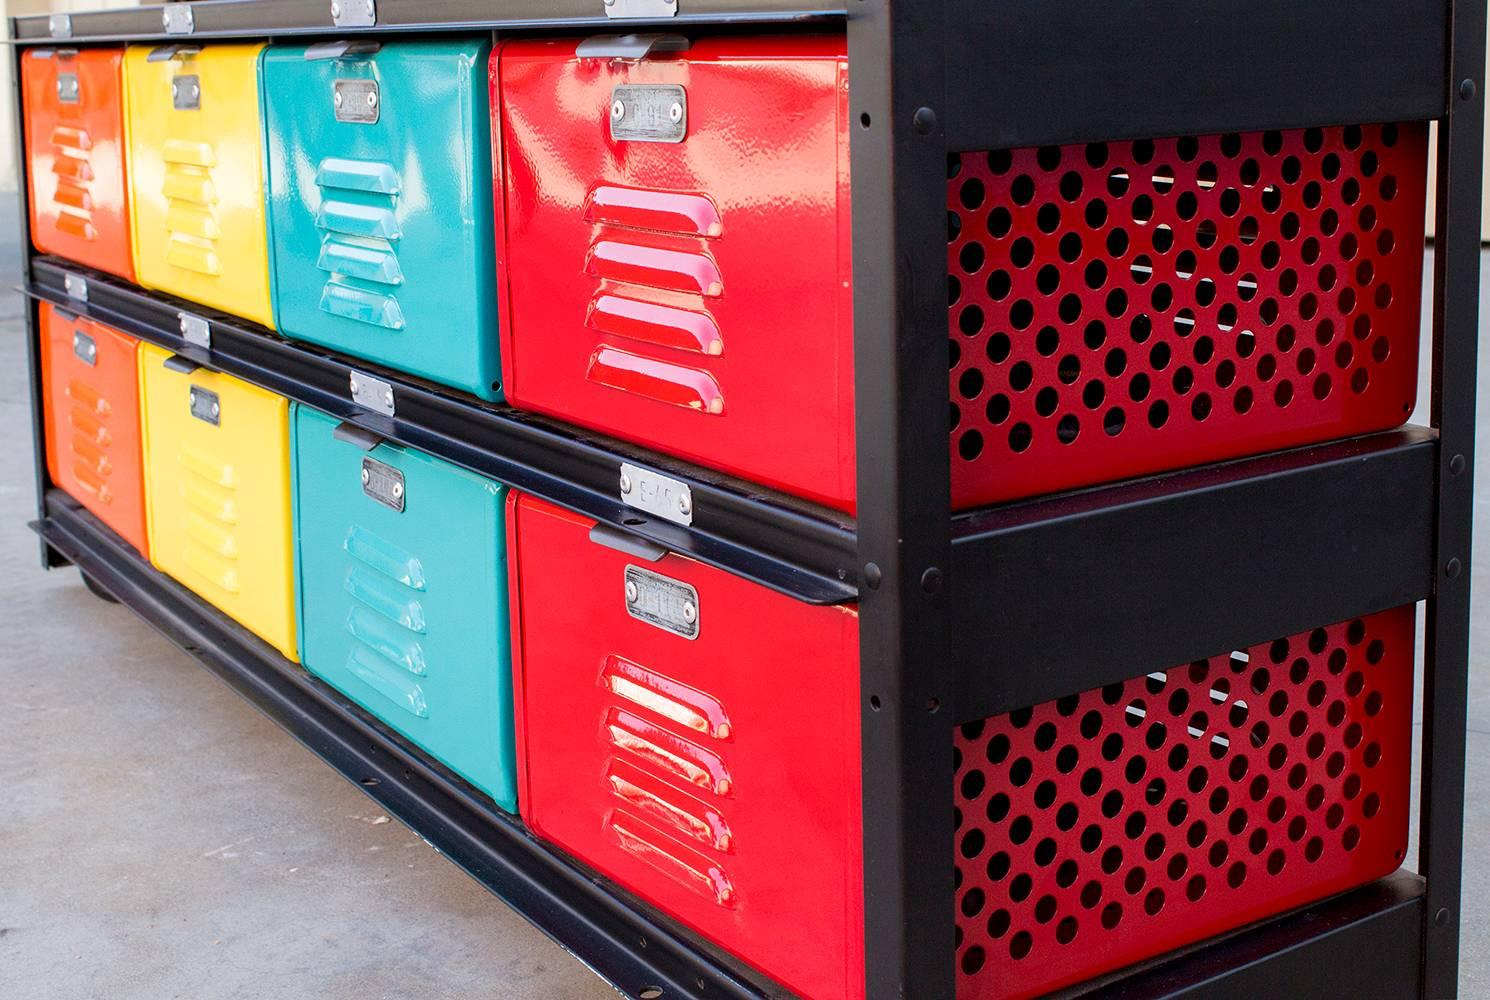 1960s refurbished vintage locker basket unit in 4 x 2 configuration. This rainbow colored unit features freshly powder coated baskets in tangerine, yellow, turquoise and ruby red all cased in a matte black frame on casters. 

Custom refinished to